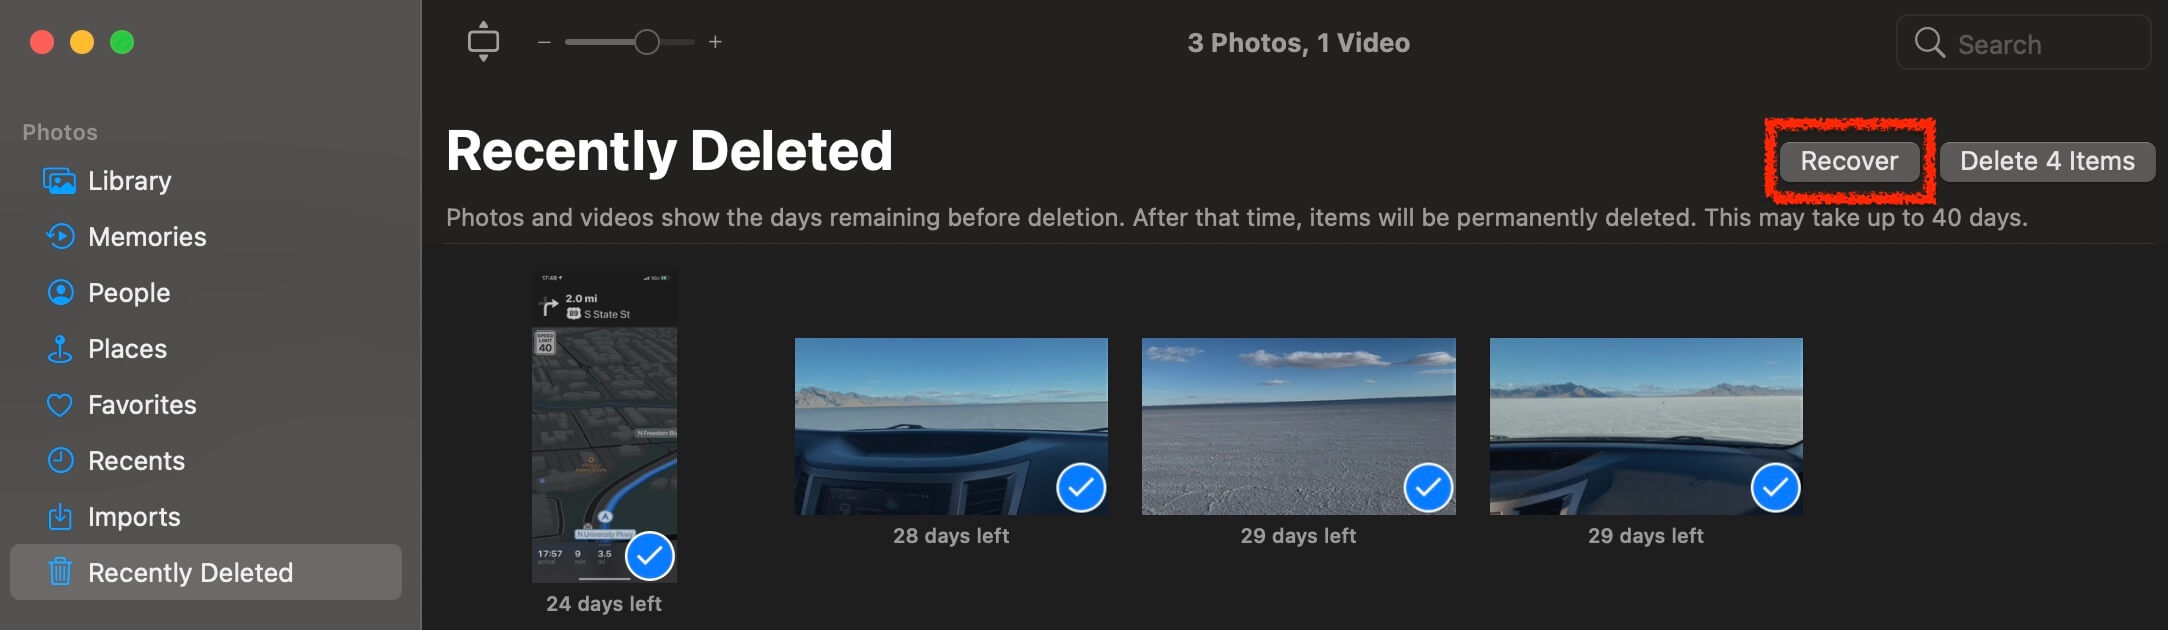 recovering recently deleted photos